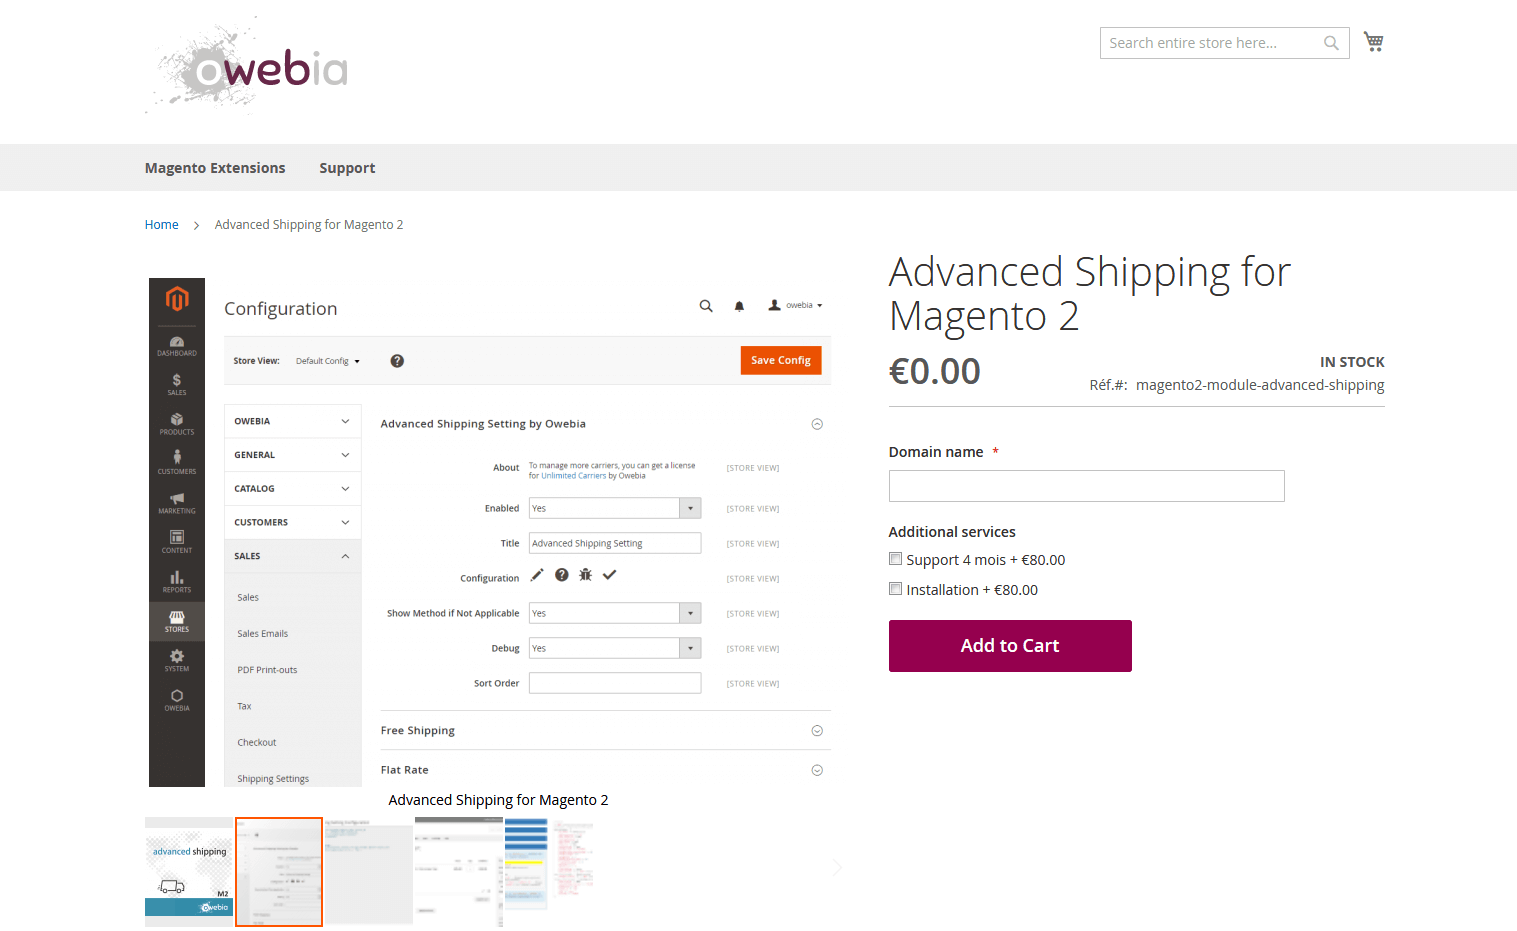 Screenshot of the Magento extension Advanced Shipping website.